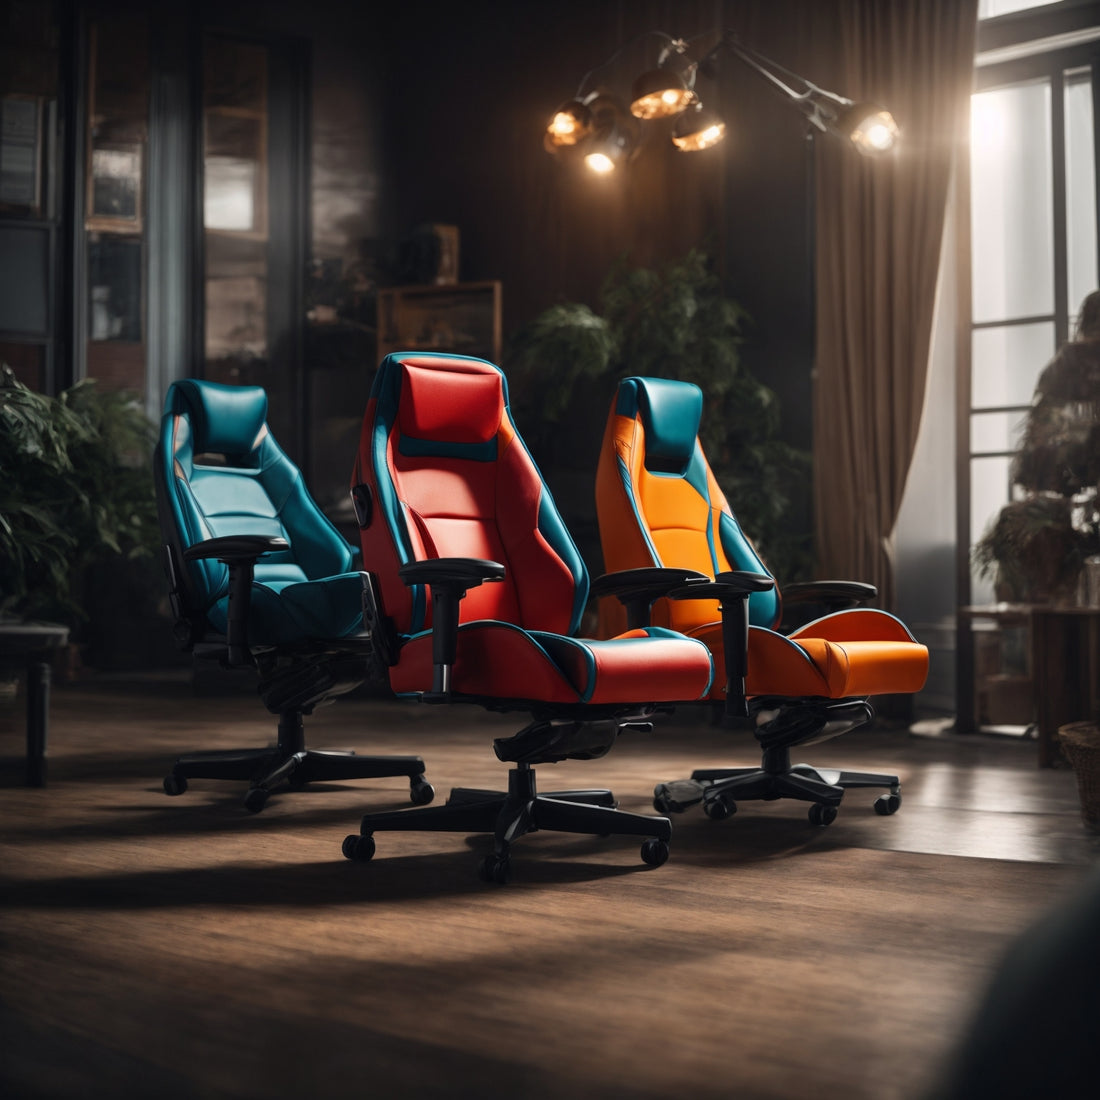 The Evolution of Gaming Chairs: From Basic to the Kratos 4D Throne Haptic Gaming Chair